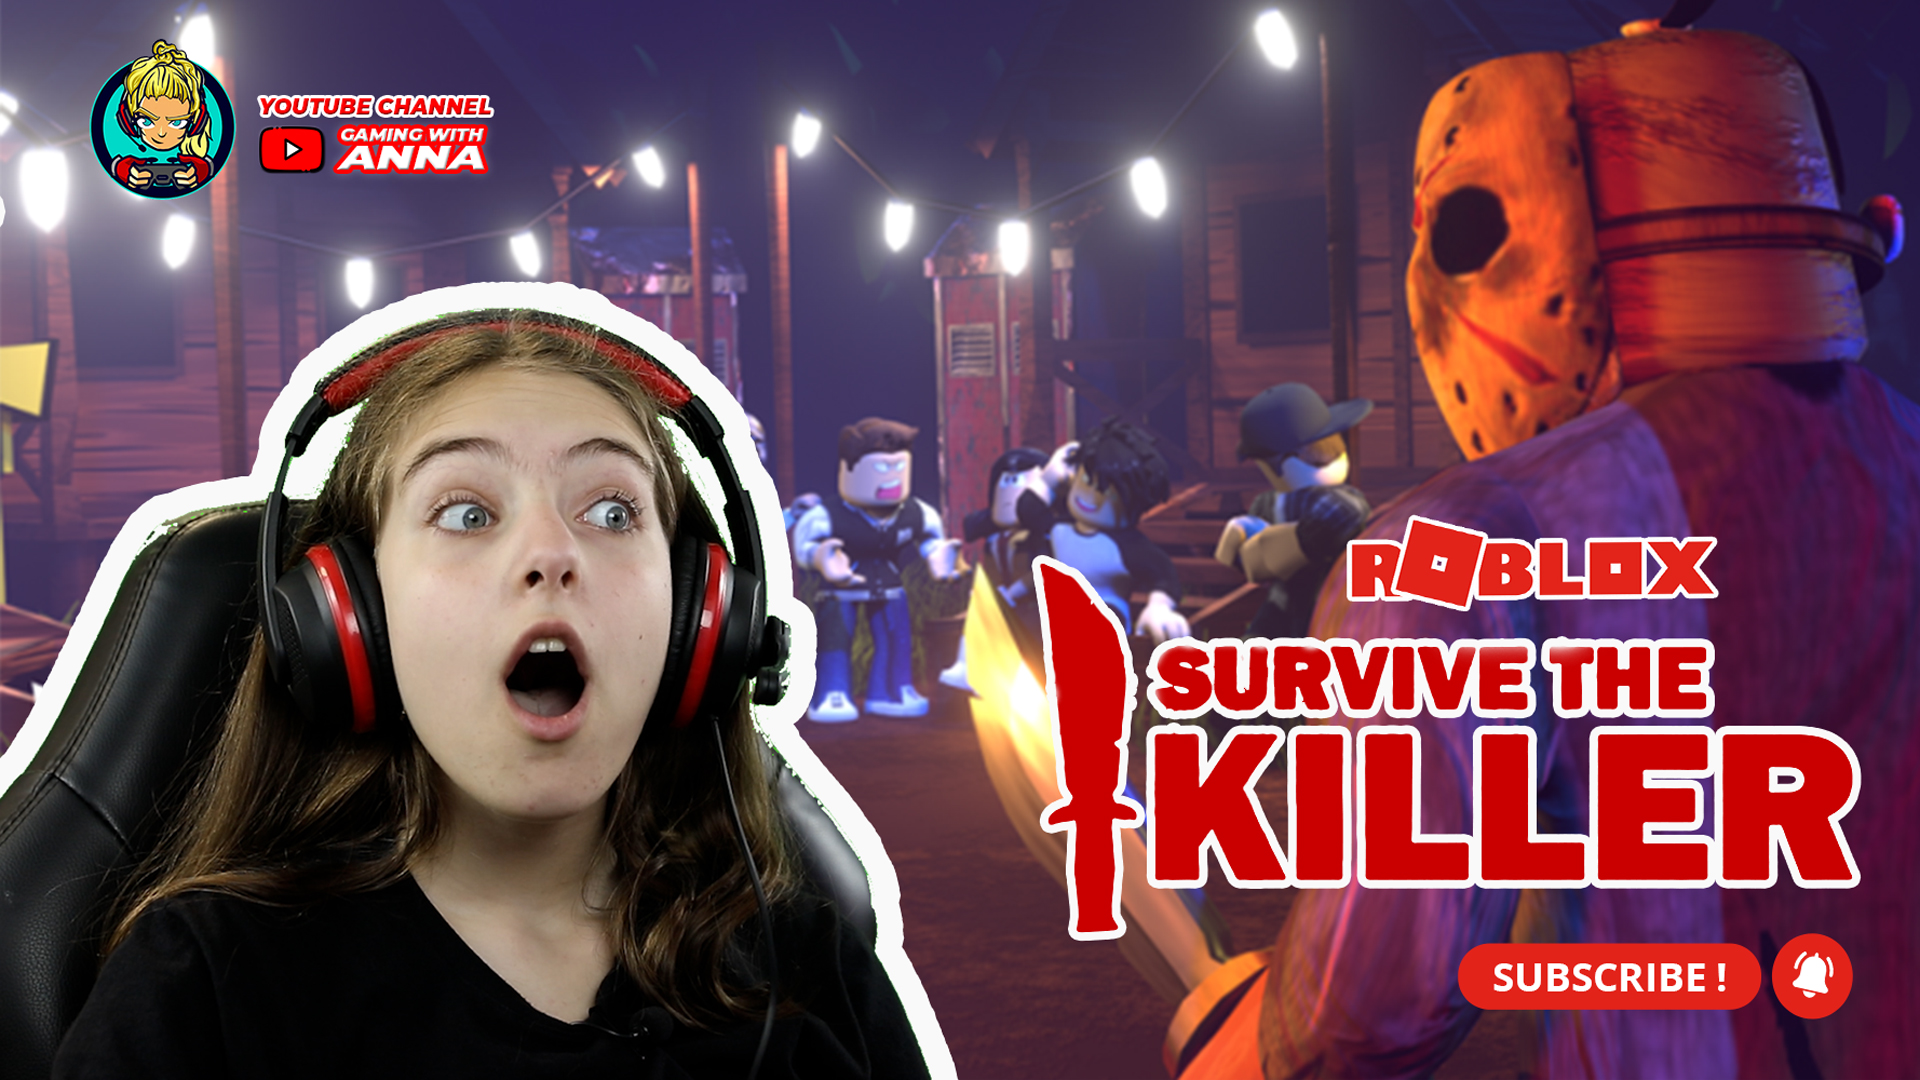 Survive The Killer Roblox Survive The Killer Gwa - how to make a killer type game in roblox